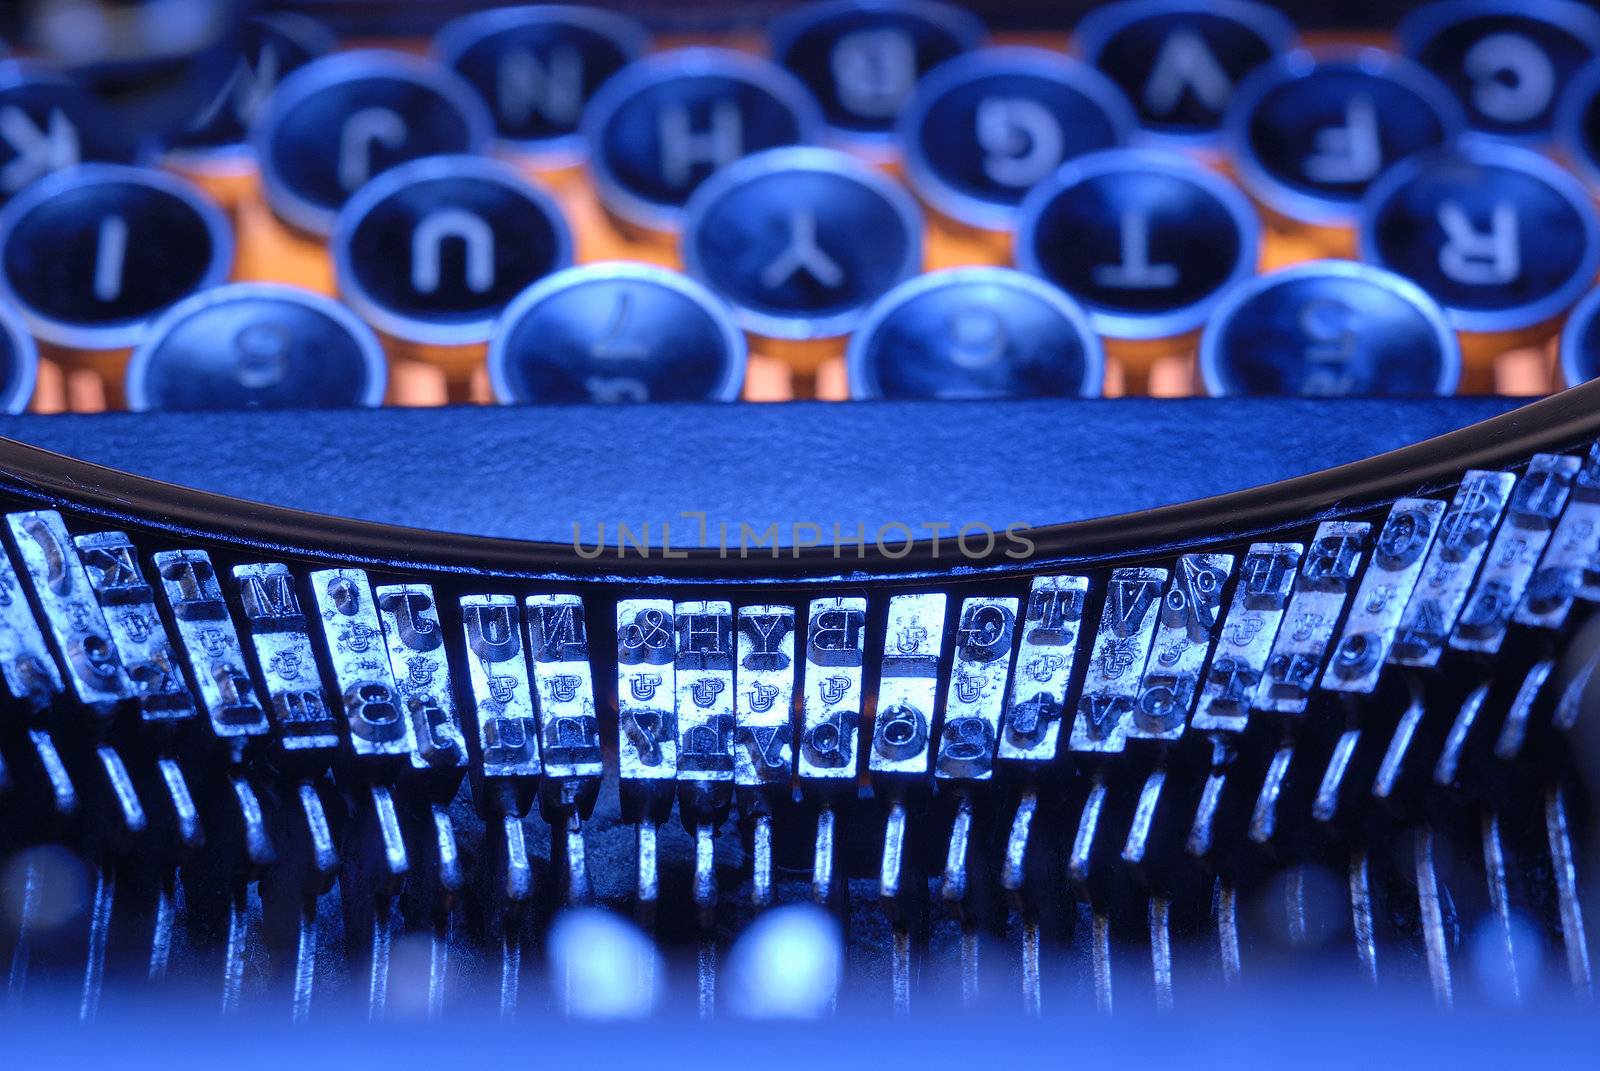 Closeup of old typewriter keys and fonts in blues and orange